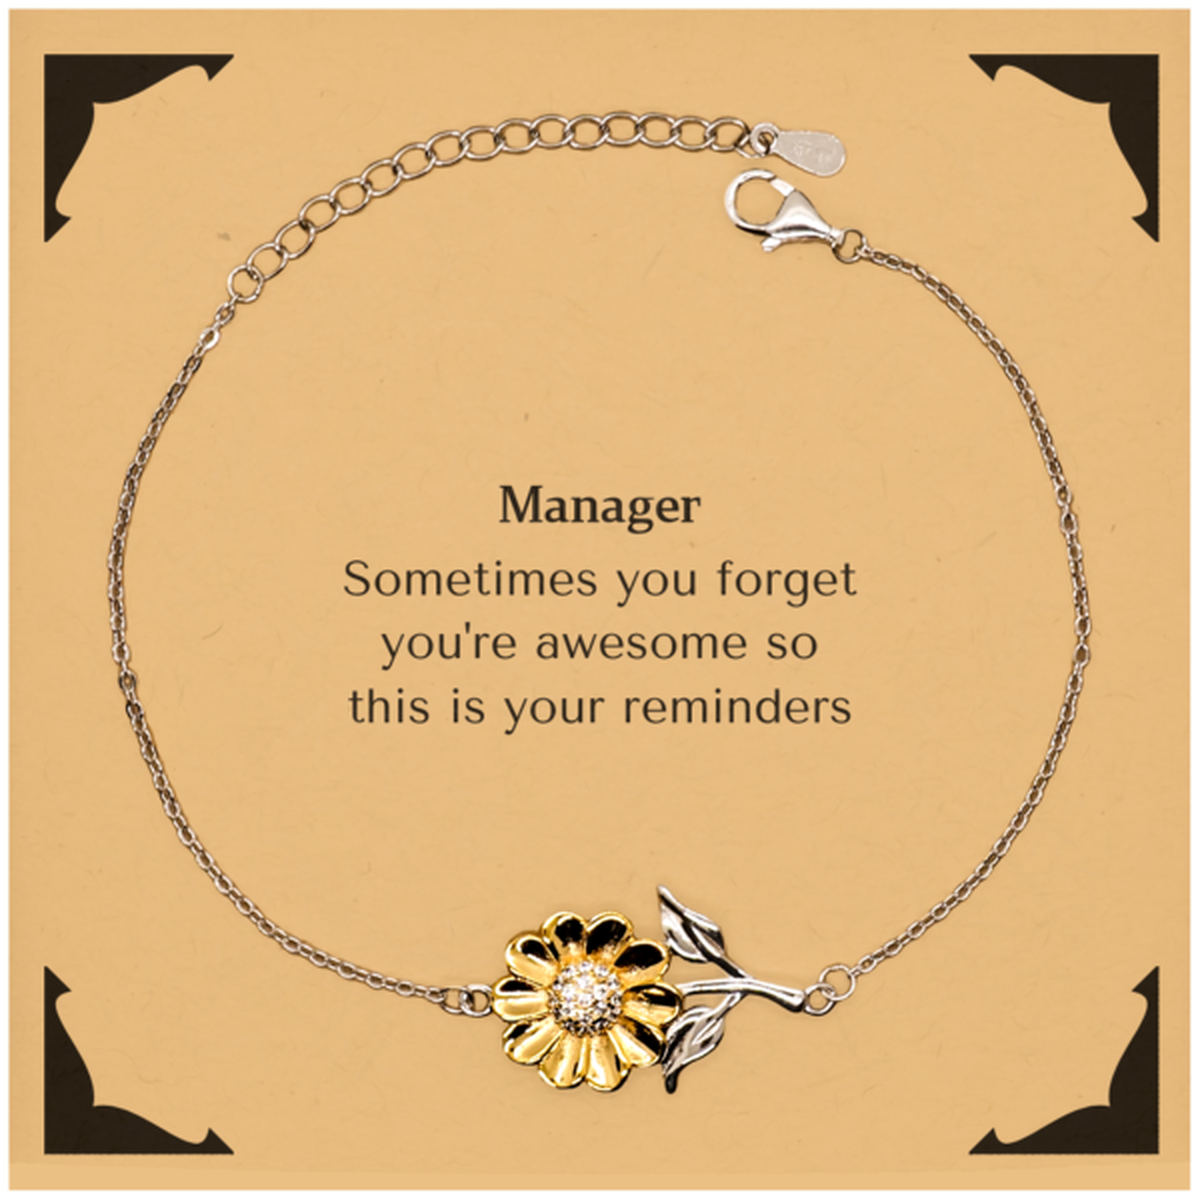 Sentimental Manager Sunflower Bracelet, Manager Sometimes you forget you're awesome so this is your reminders, Graduation Christmas Birthday Gifts for Manager, Men, Women, Coworkers